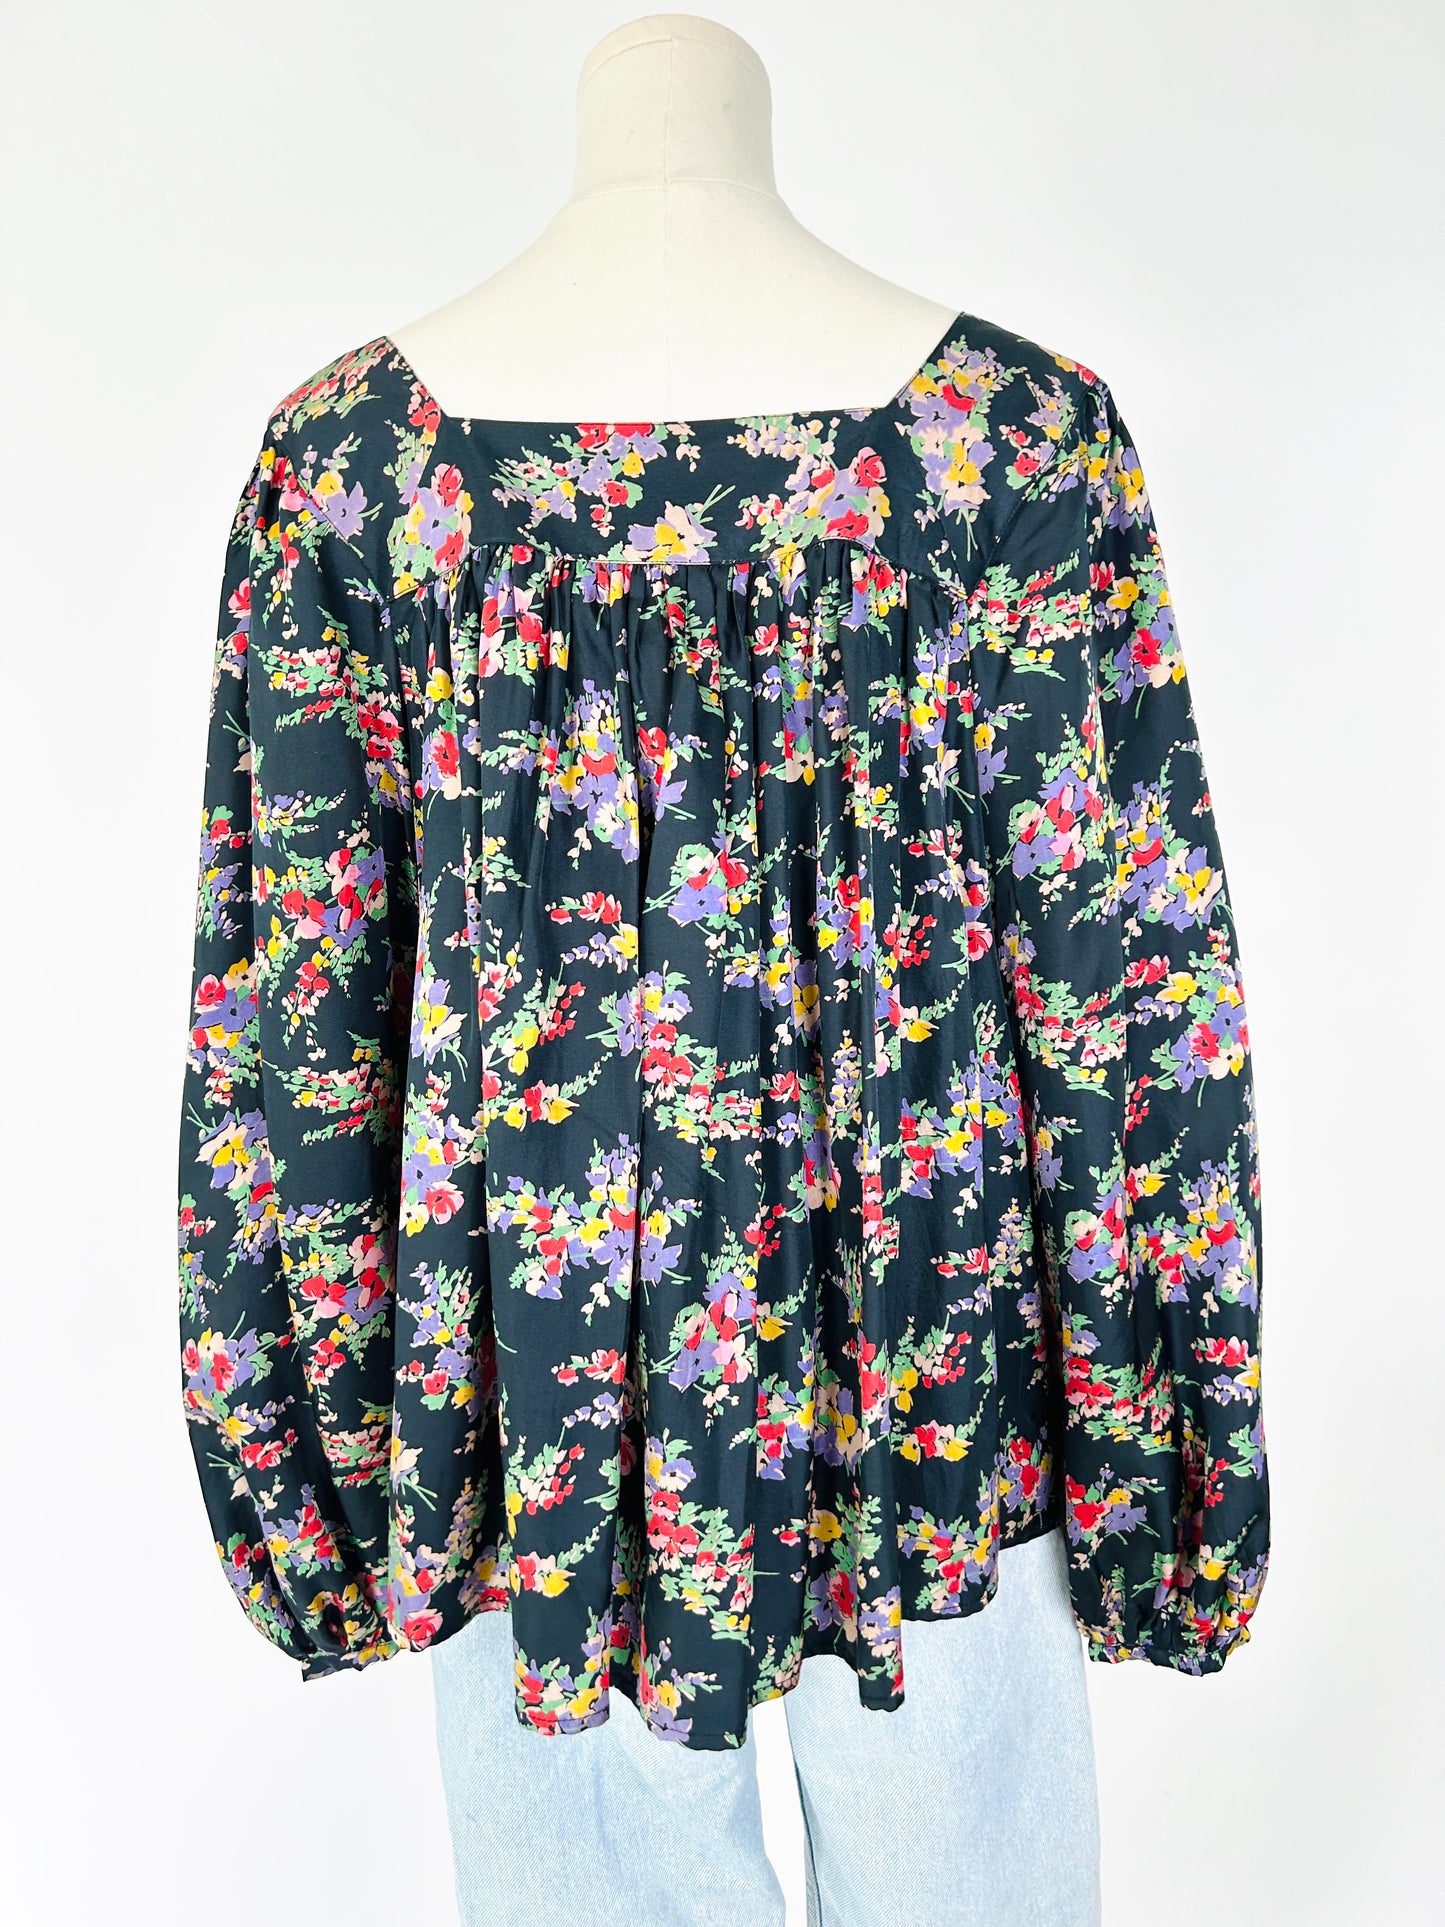 The Great Black Floral Top